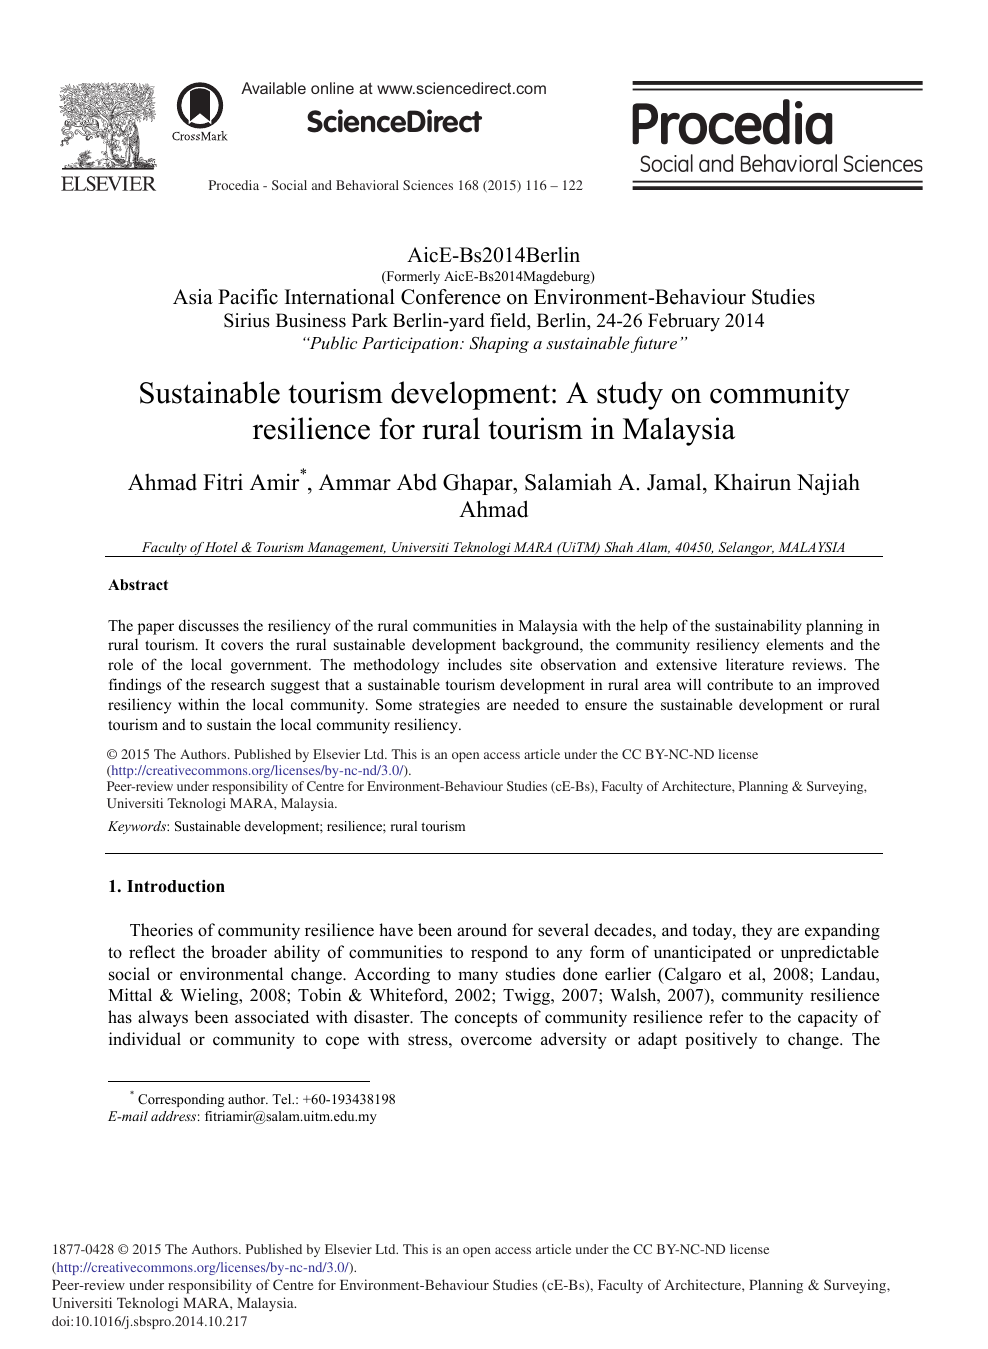 Sustainable Tourism Development A Study On Community Resilience For Rural Tourism In Malaysia Topic Of Research Paper In Economics And Business Download Scholarly Article Pdf And Read For Free On Cyberleninka